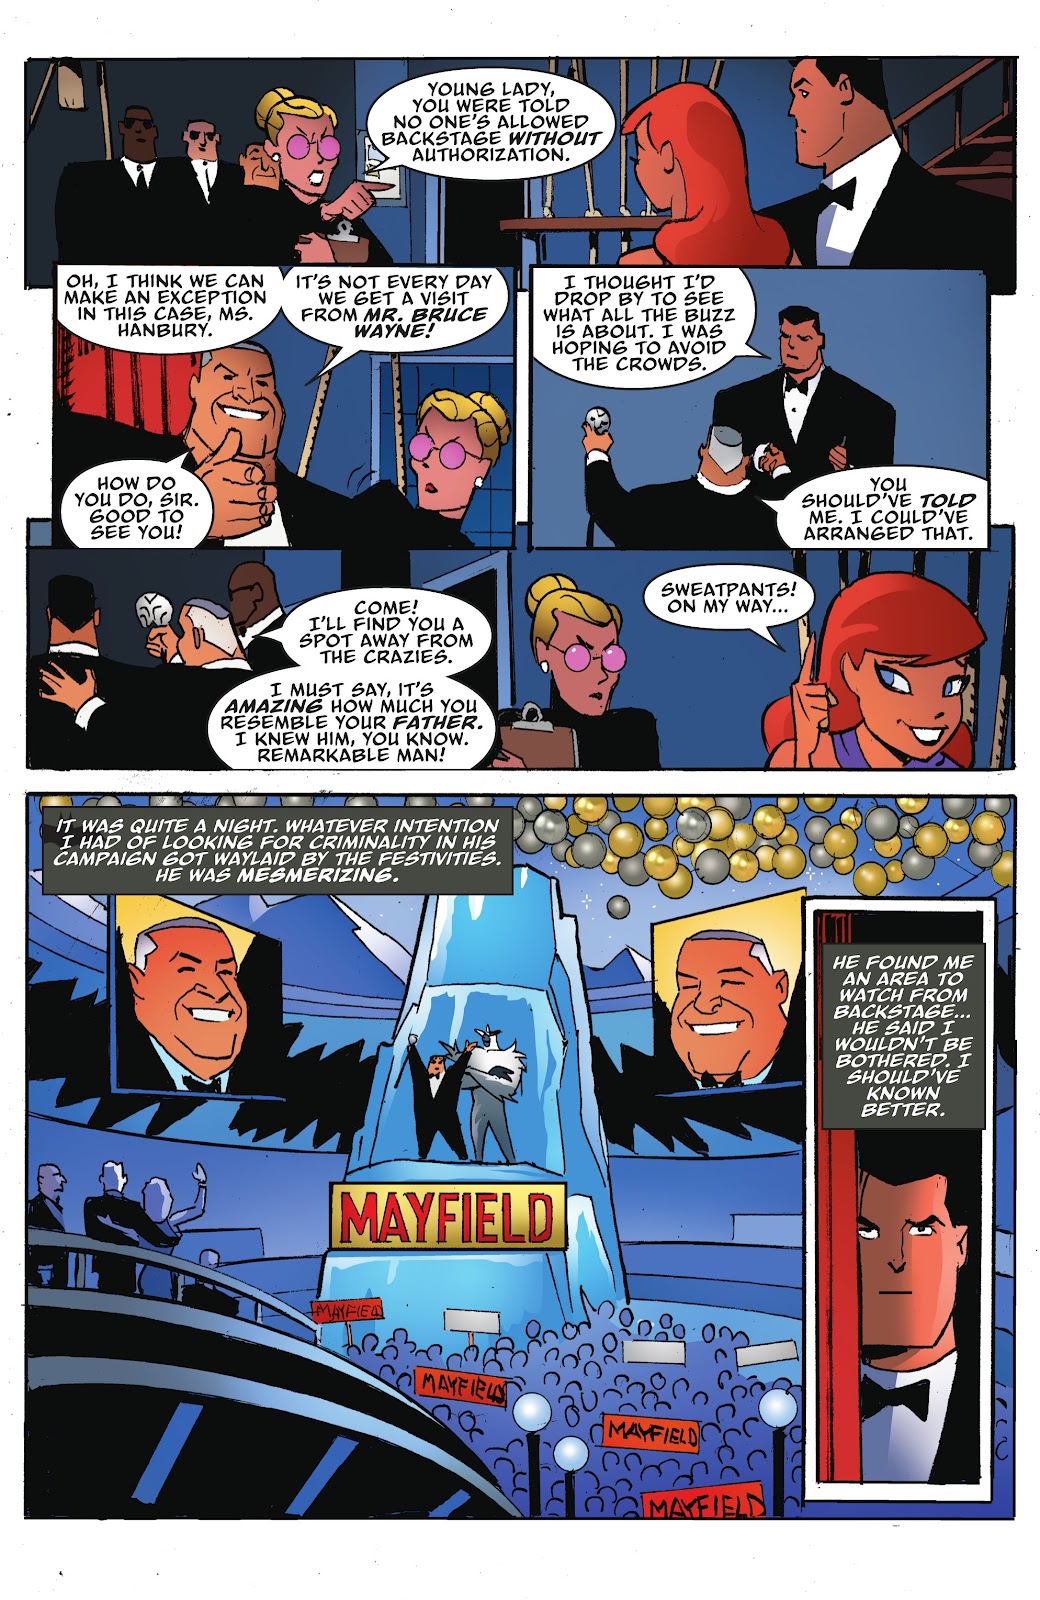 Batman: The Adventures Continue: Season Two issue 6 - Page 10